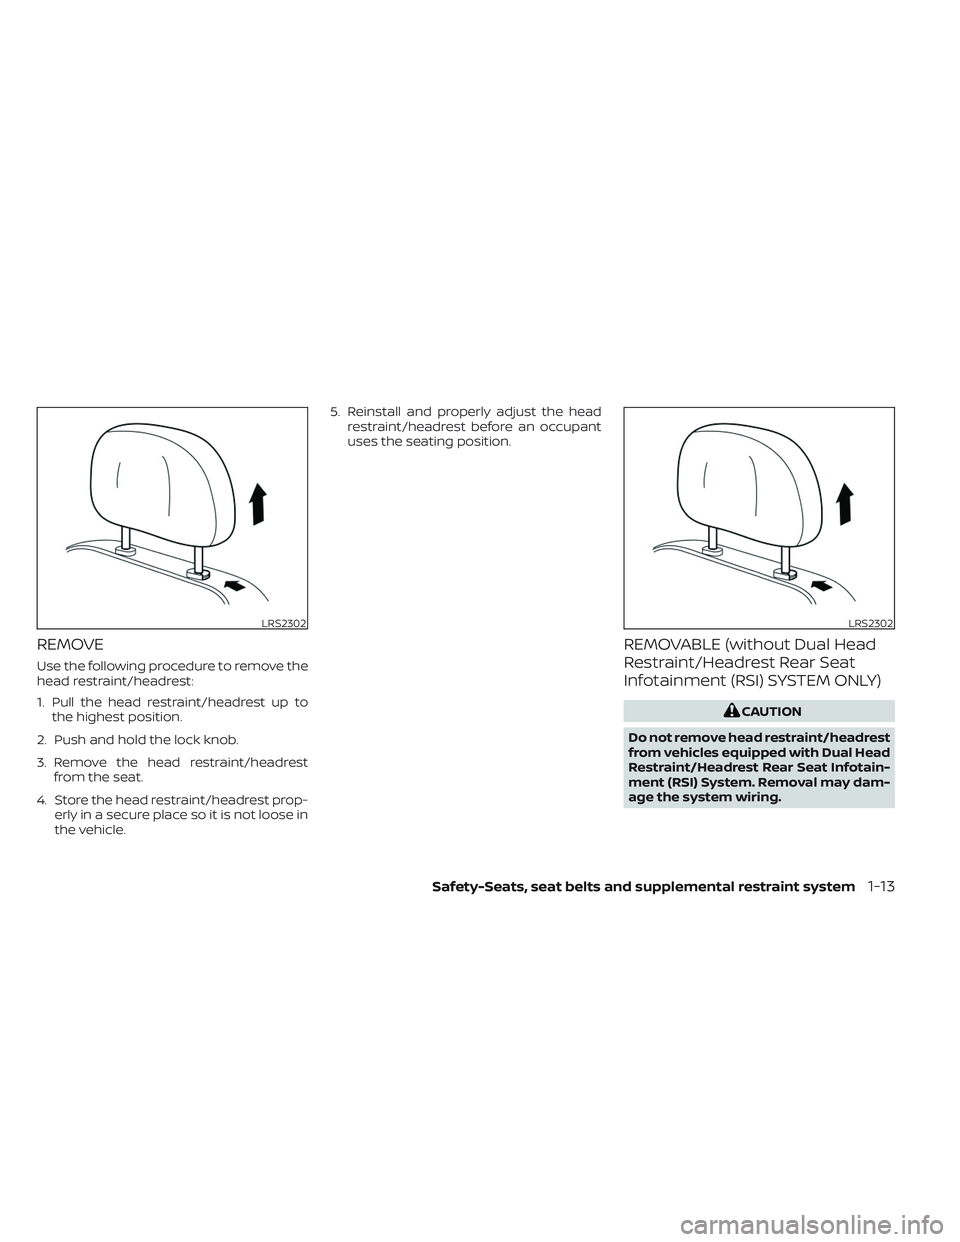 NISSAN TITAN 2022  Owners Manual REMOVE
Use the following procedure to remove the
head restraint/headrest:
1. Pull the head restraint/headrest up tothe highest position.
2. Push and hold the lock knob.
3. Remove the head restraint/he